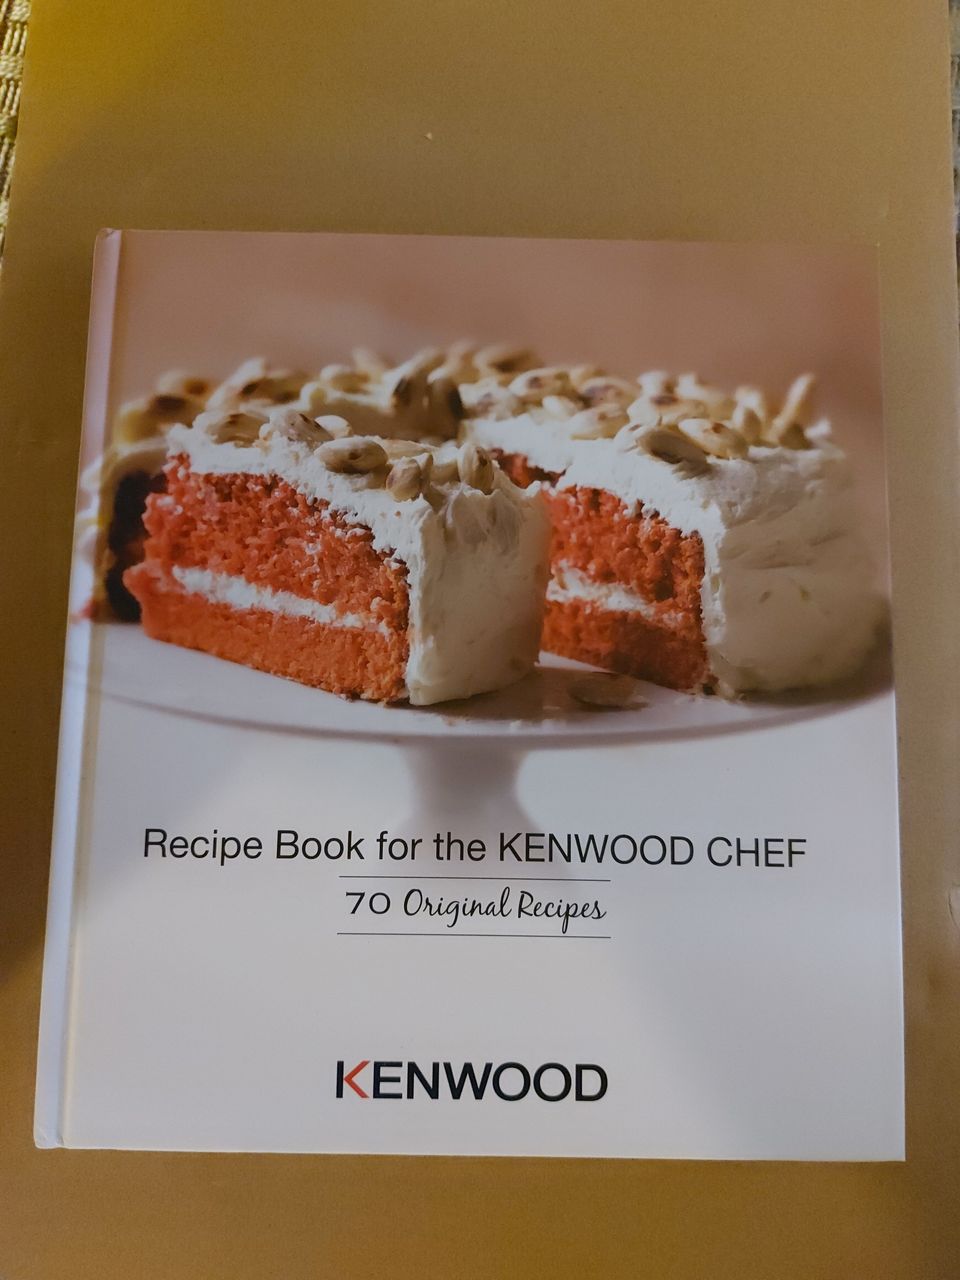 Recipe book for the Kenwood chief